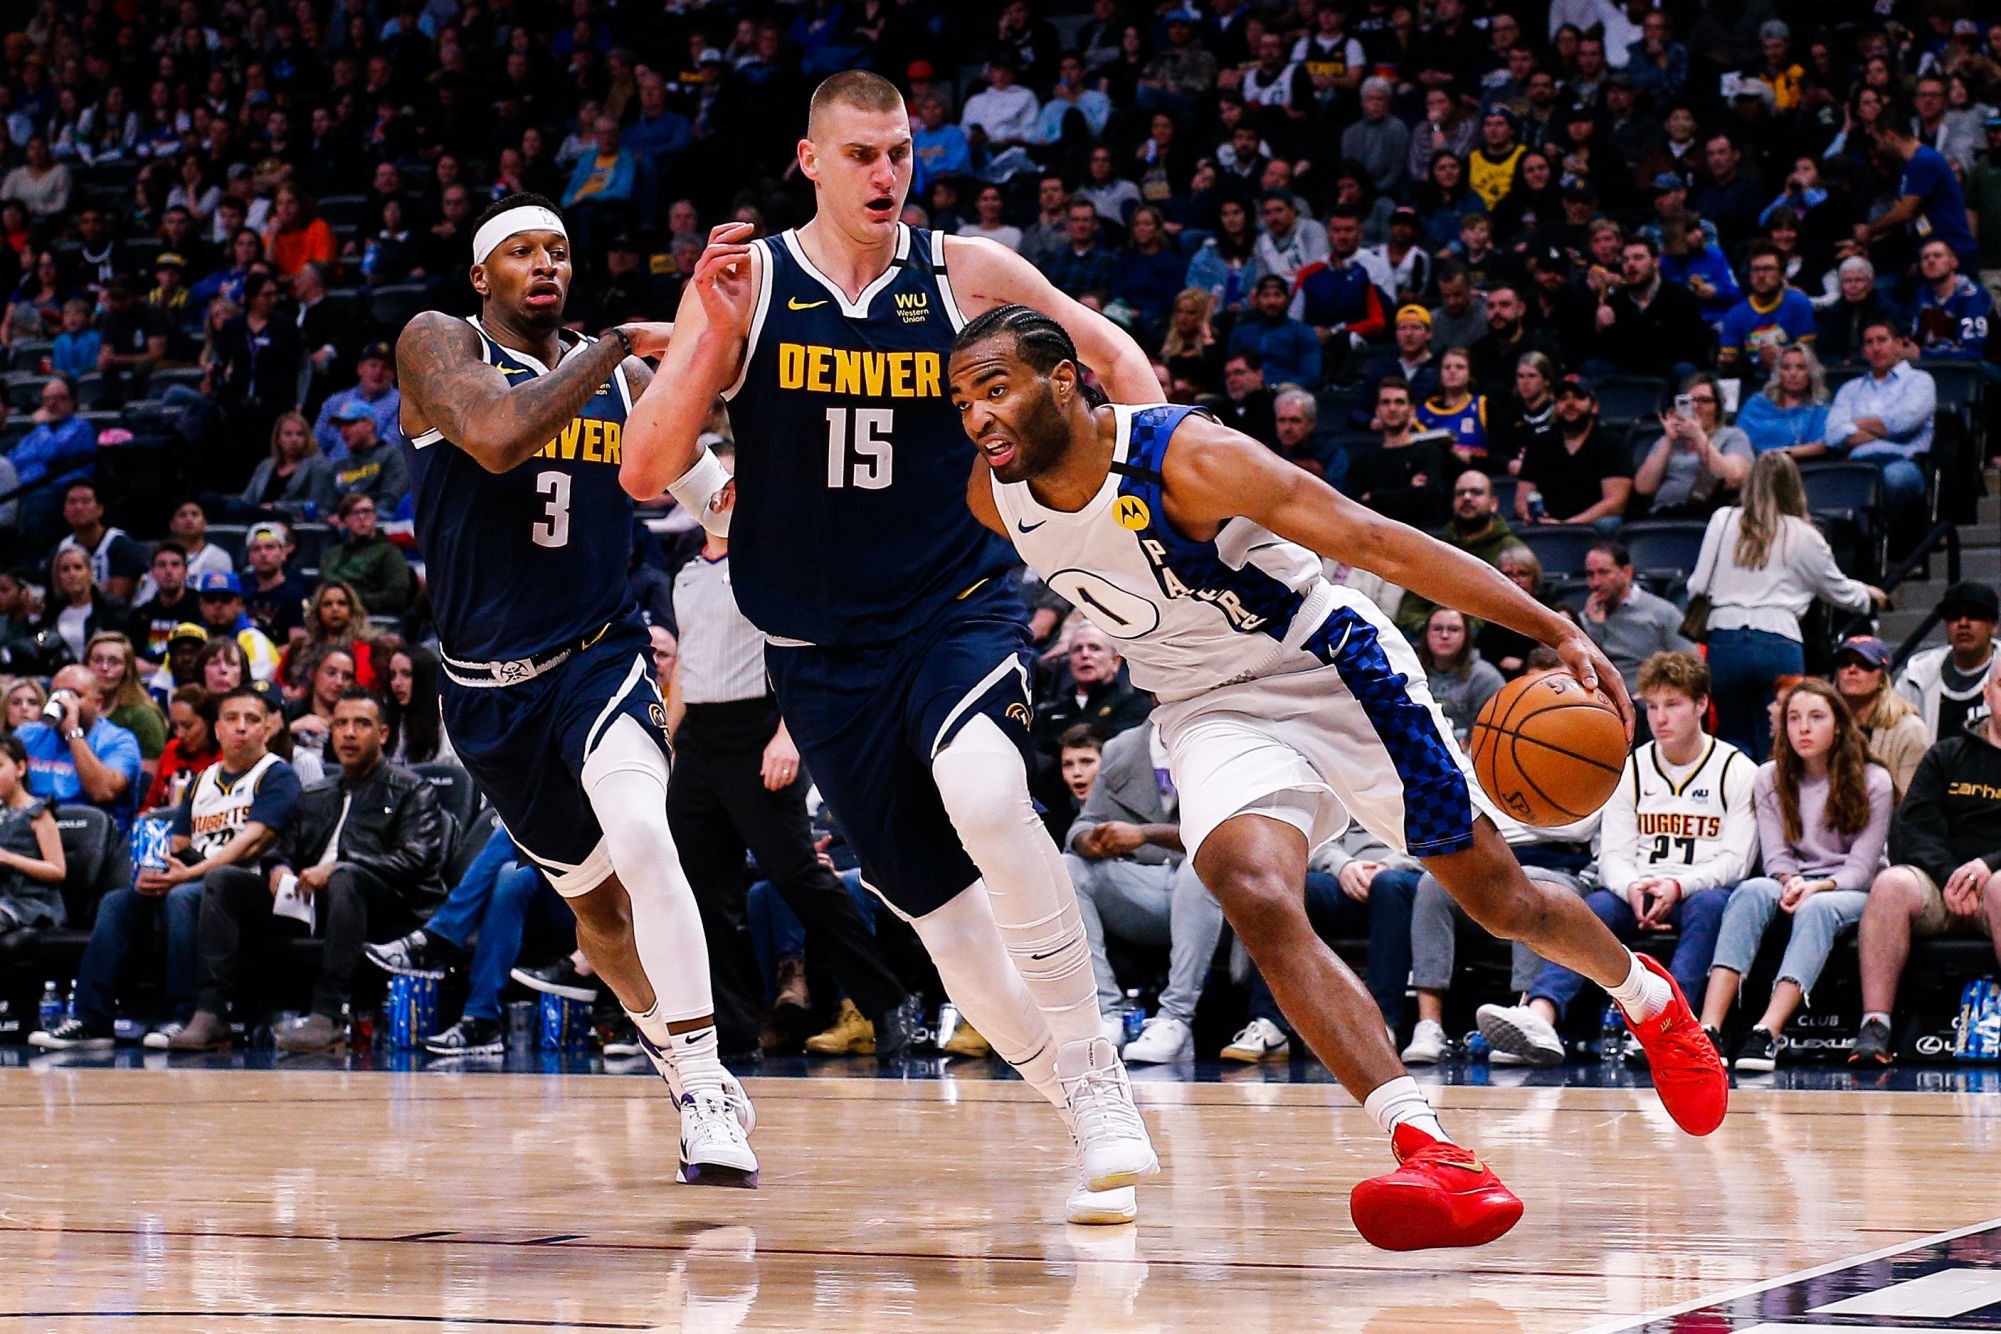 Jan 19, 2020; Denver, Colorado, USA; Indiana Pacers forward T.J. Warren (1) drives to the net against Denver Nuggets center Nikola Jokic (15) and forward Torrey Craig (3) in the third quarter at the Pepsi Center. Mandatory Credit: Isaiah J. Downing-USA TODAY Sports/Sipa USA 

Photo by Icon Sport - Nikola JOKIC - Torrey CRAIG - T.J. WARREN - Pepsi Center - Denver (Etats Unis)